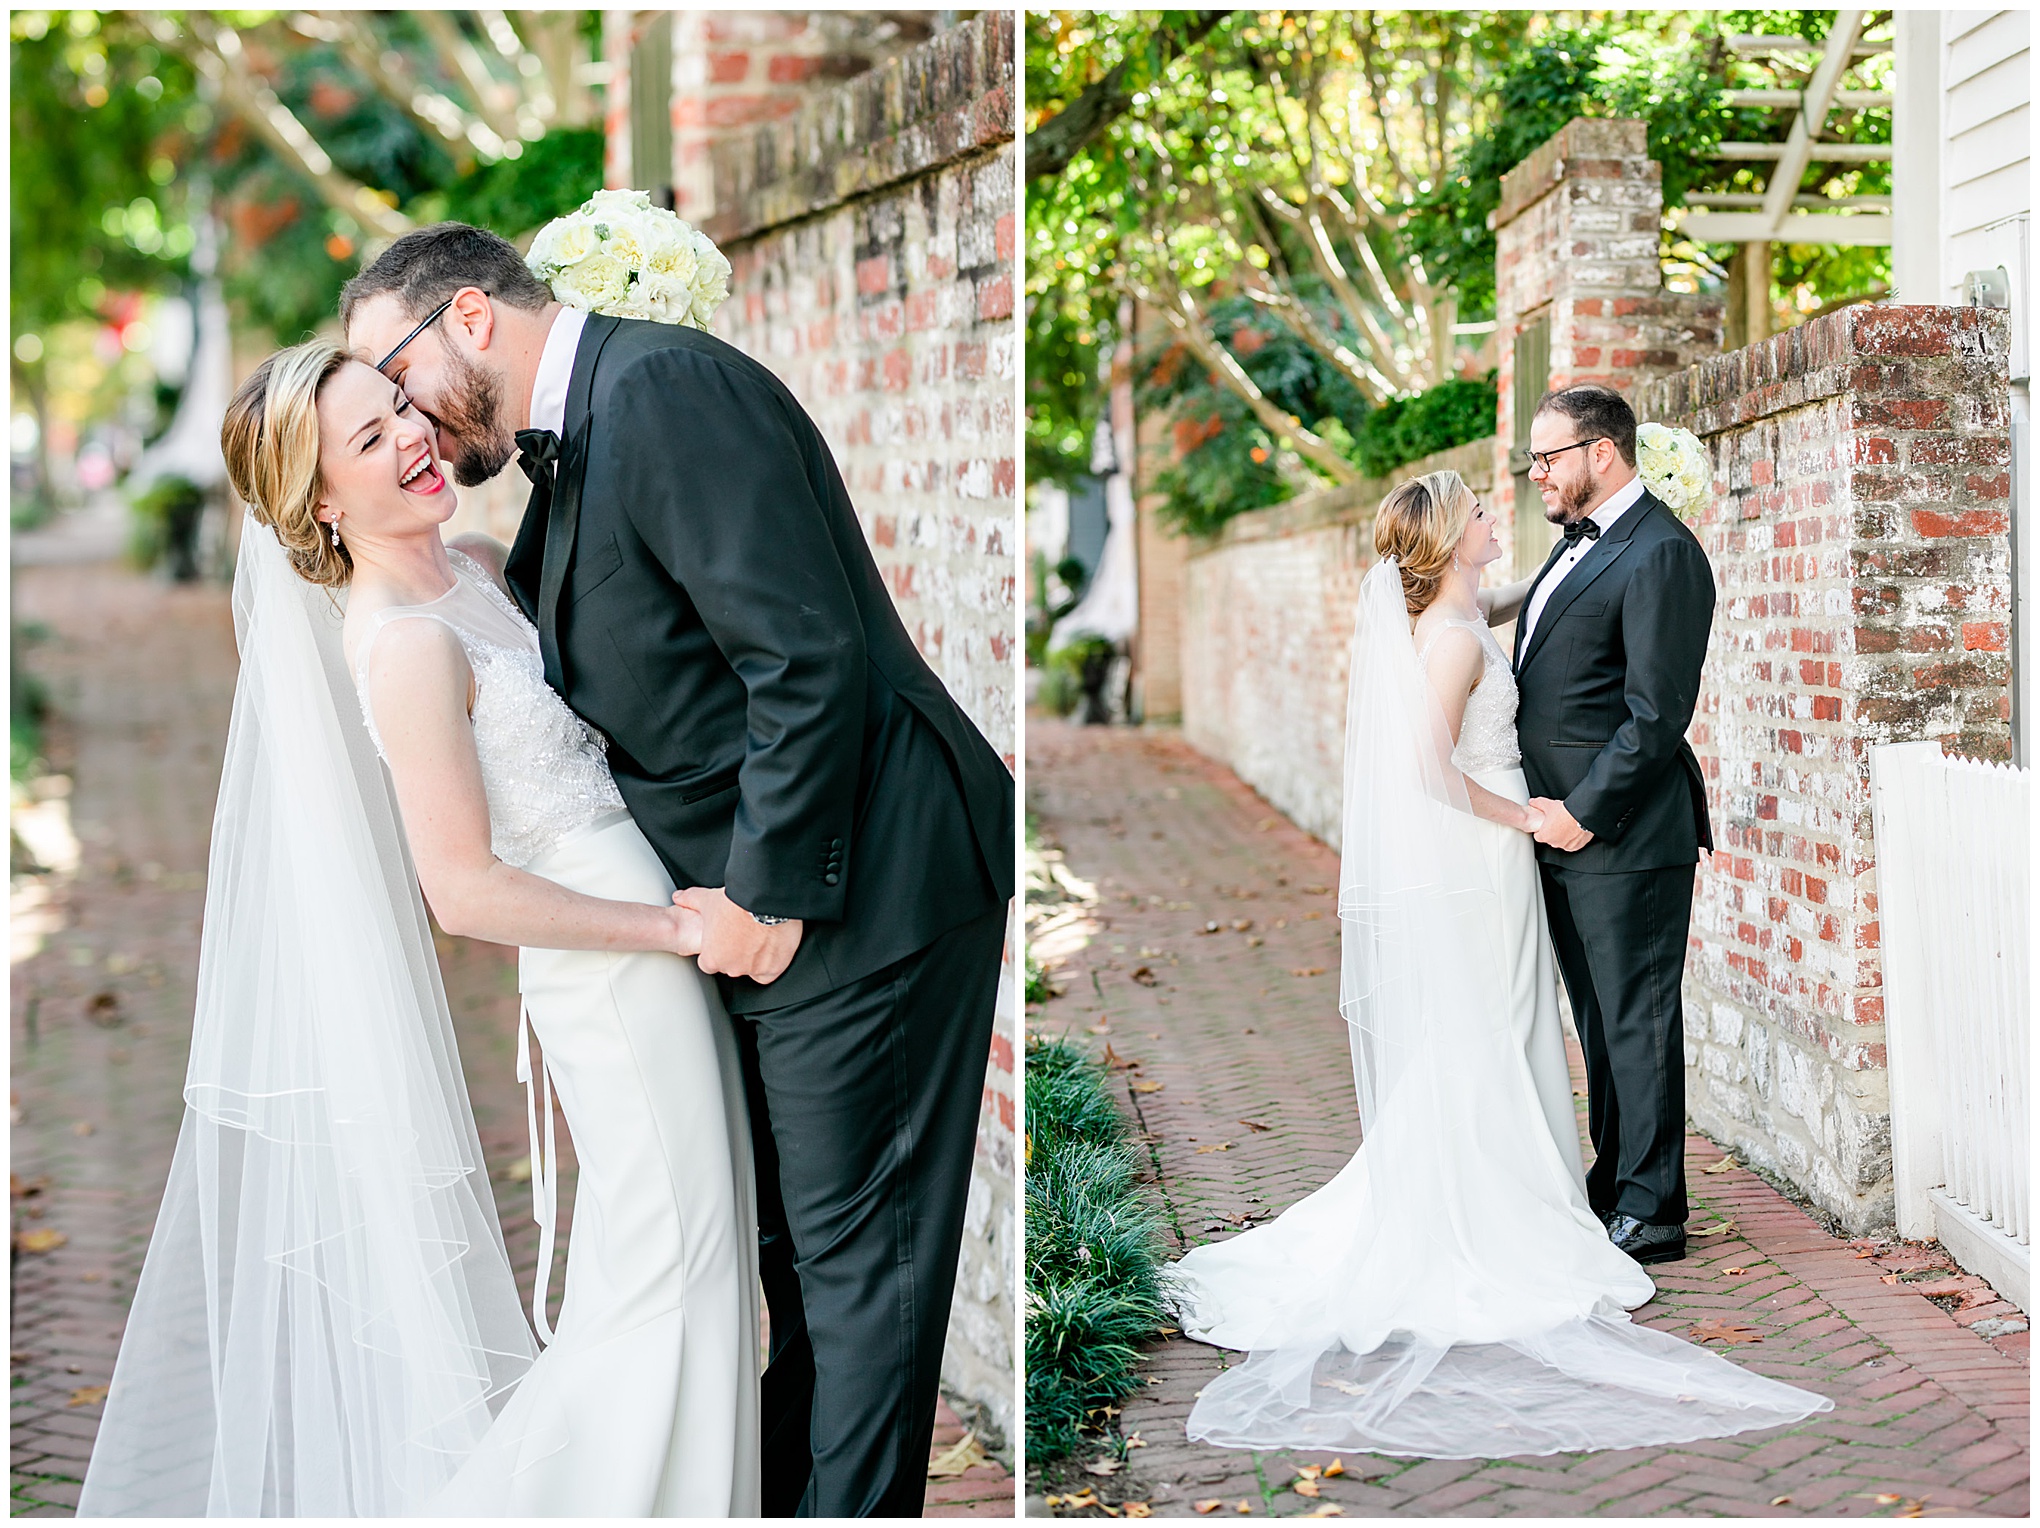 autumn Old Town Alexandria wedding, Old Town photographer, Alexandria wedding photographer, Northern Virginia wedding photographer, DC wedding photographer, Rachel E.H. Photography, autumn wedding, early autumn wedding, warm weather wedding, white aesthetic, classic wedding aesthetic, classic bride and groom, magic hour portraits, historic side streets, happy bride